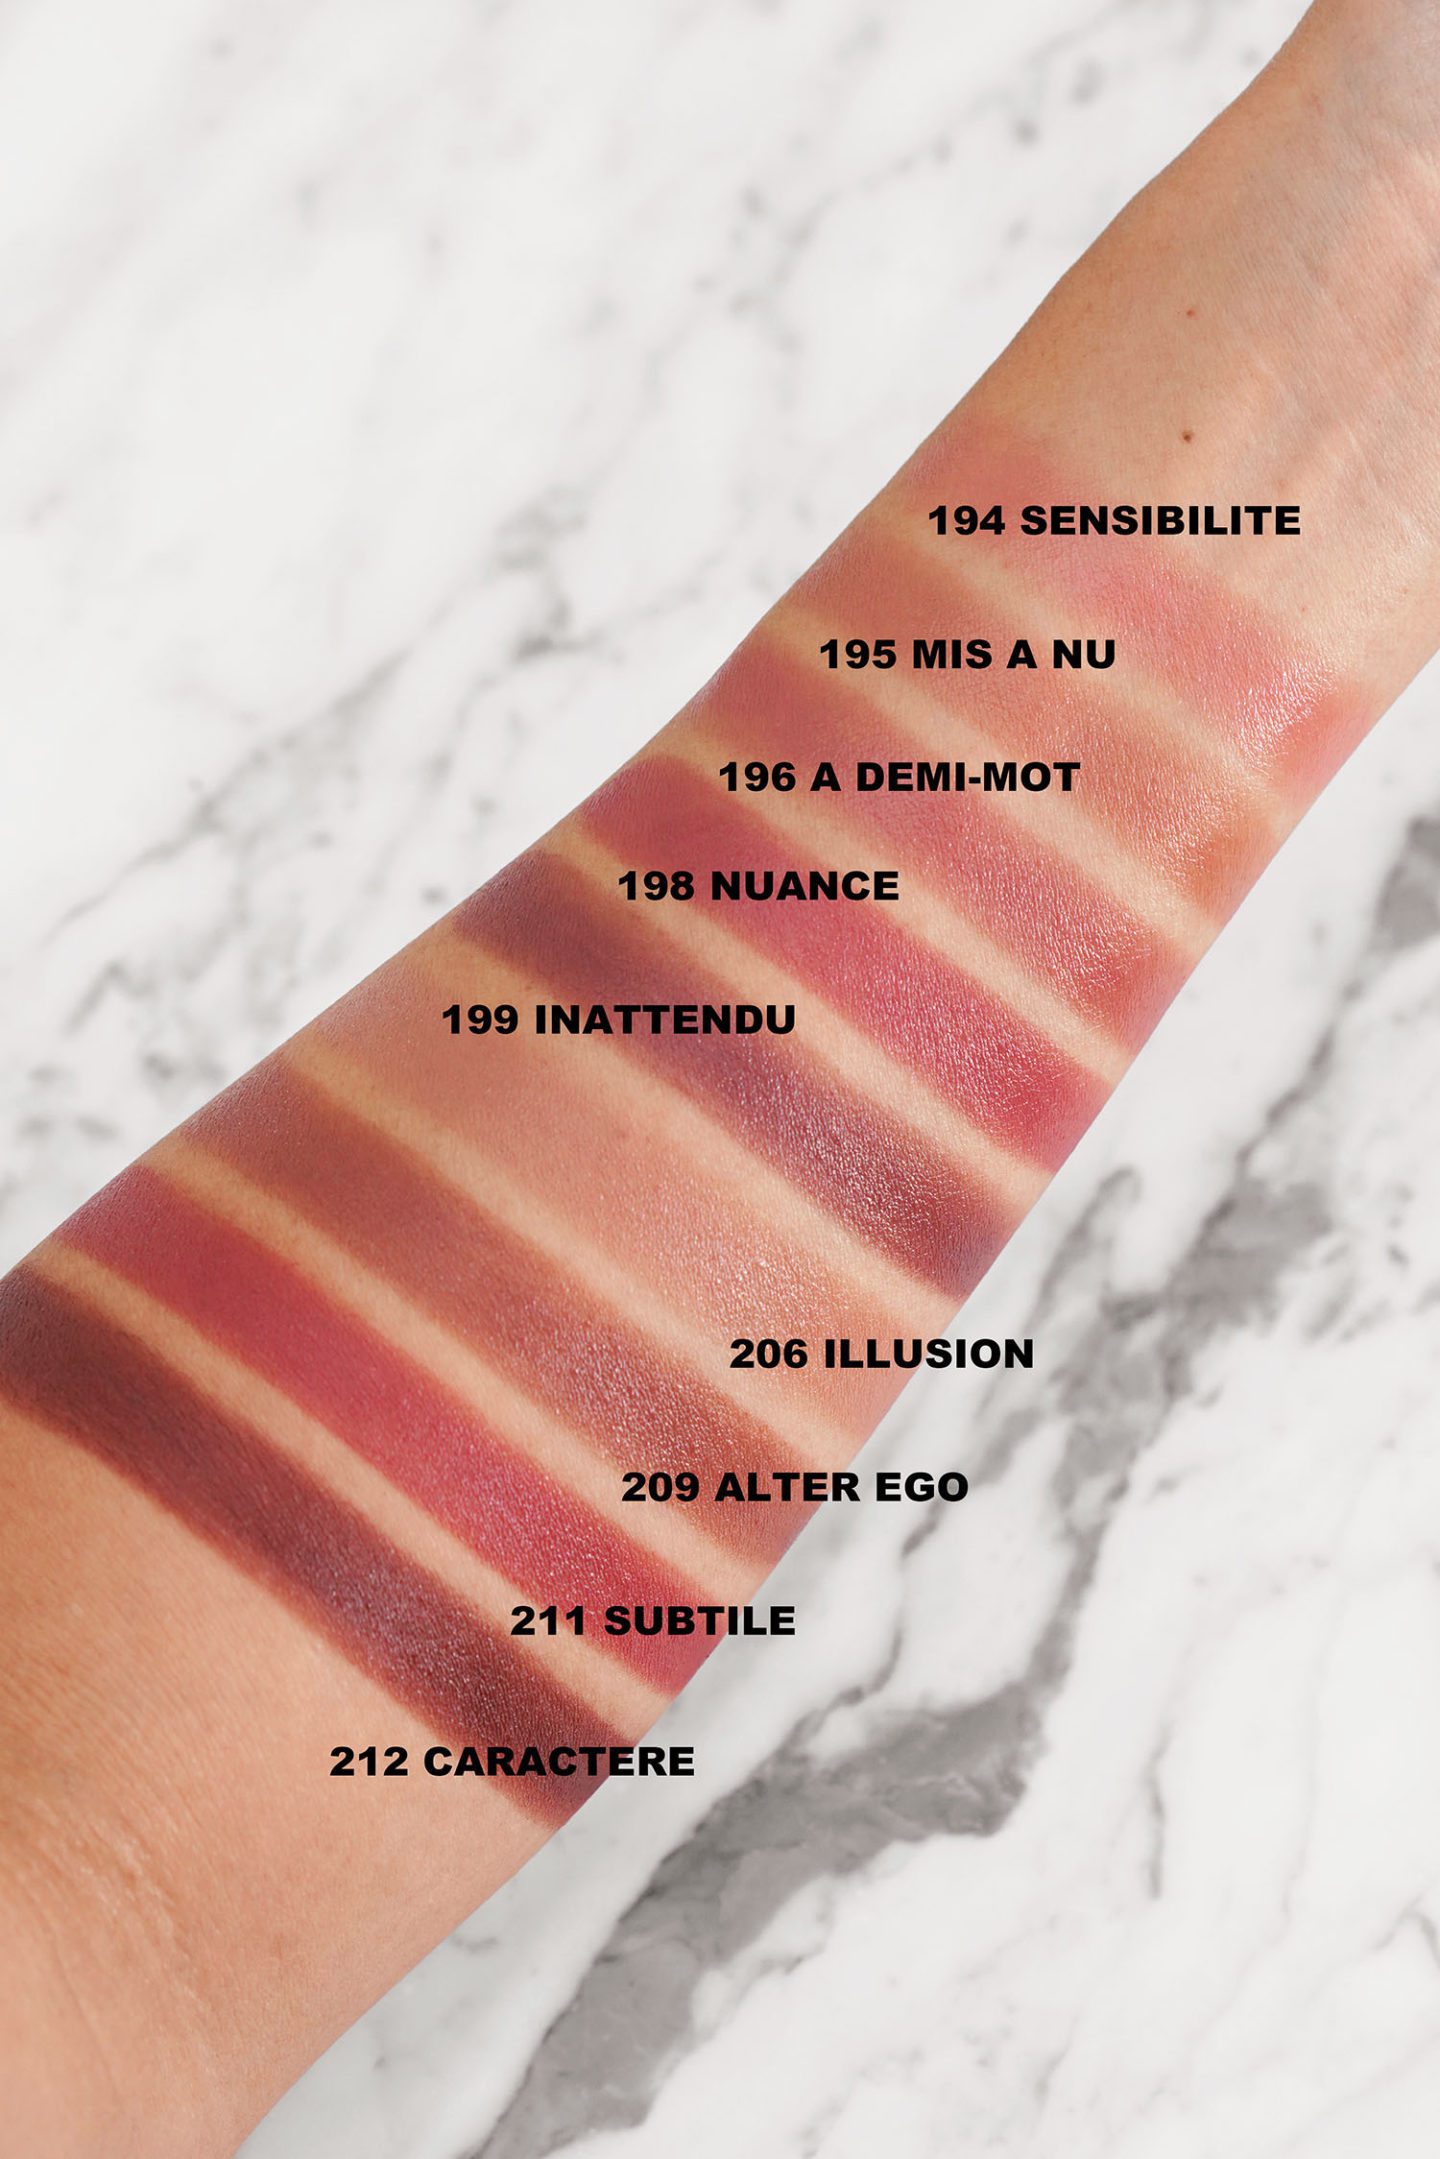 Chanel Fall 2022 Rouge Allure Lipstick swatches | The Beauty Lookbook